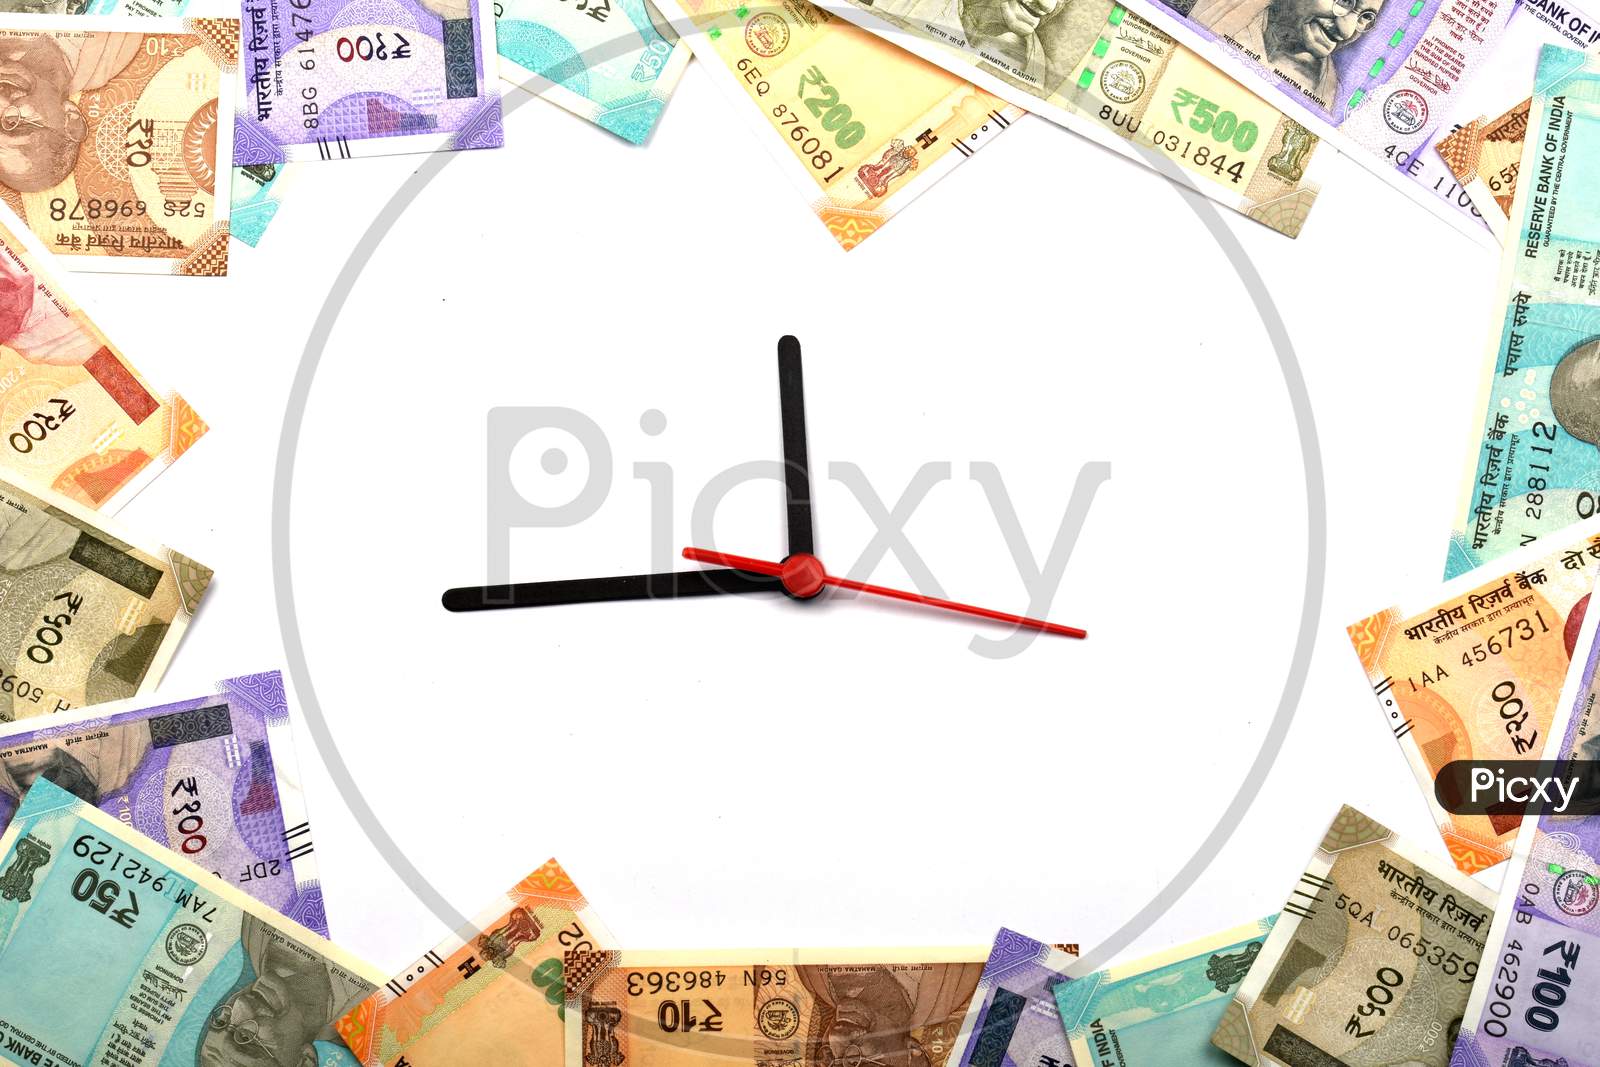 Time Is Money,Time And Money Concept, Indian Currency, Rupee, Indian Rupee,Indian Money, Business, Finance, Investment, Saving And Corruption Concept - Image